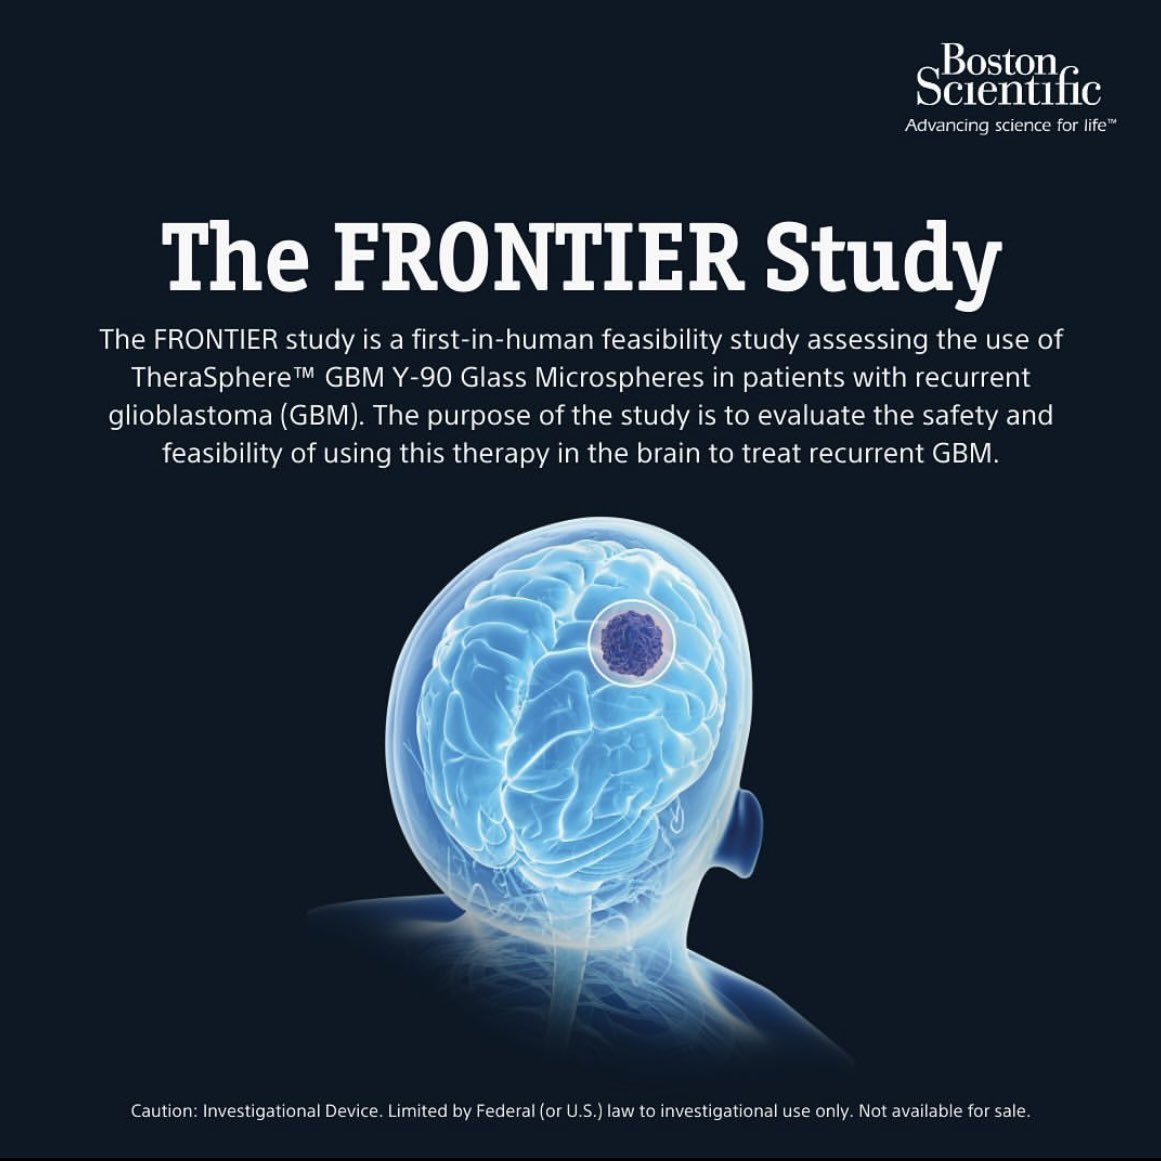 Proud to share @johnboockvar, @yafellserulle, and @Weinjc have begun enrolling patients in @bsc_io ’s #FRONTIERstudy assessing the use of TheraSphere GBM Y-90 Glass Microsoheres in patients with recurrent #glioblastoma. 🔬🧠

Click the link to learn more: bostonscientific.com/en-US/medical-…